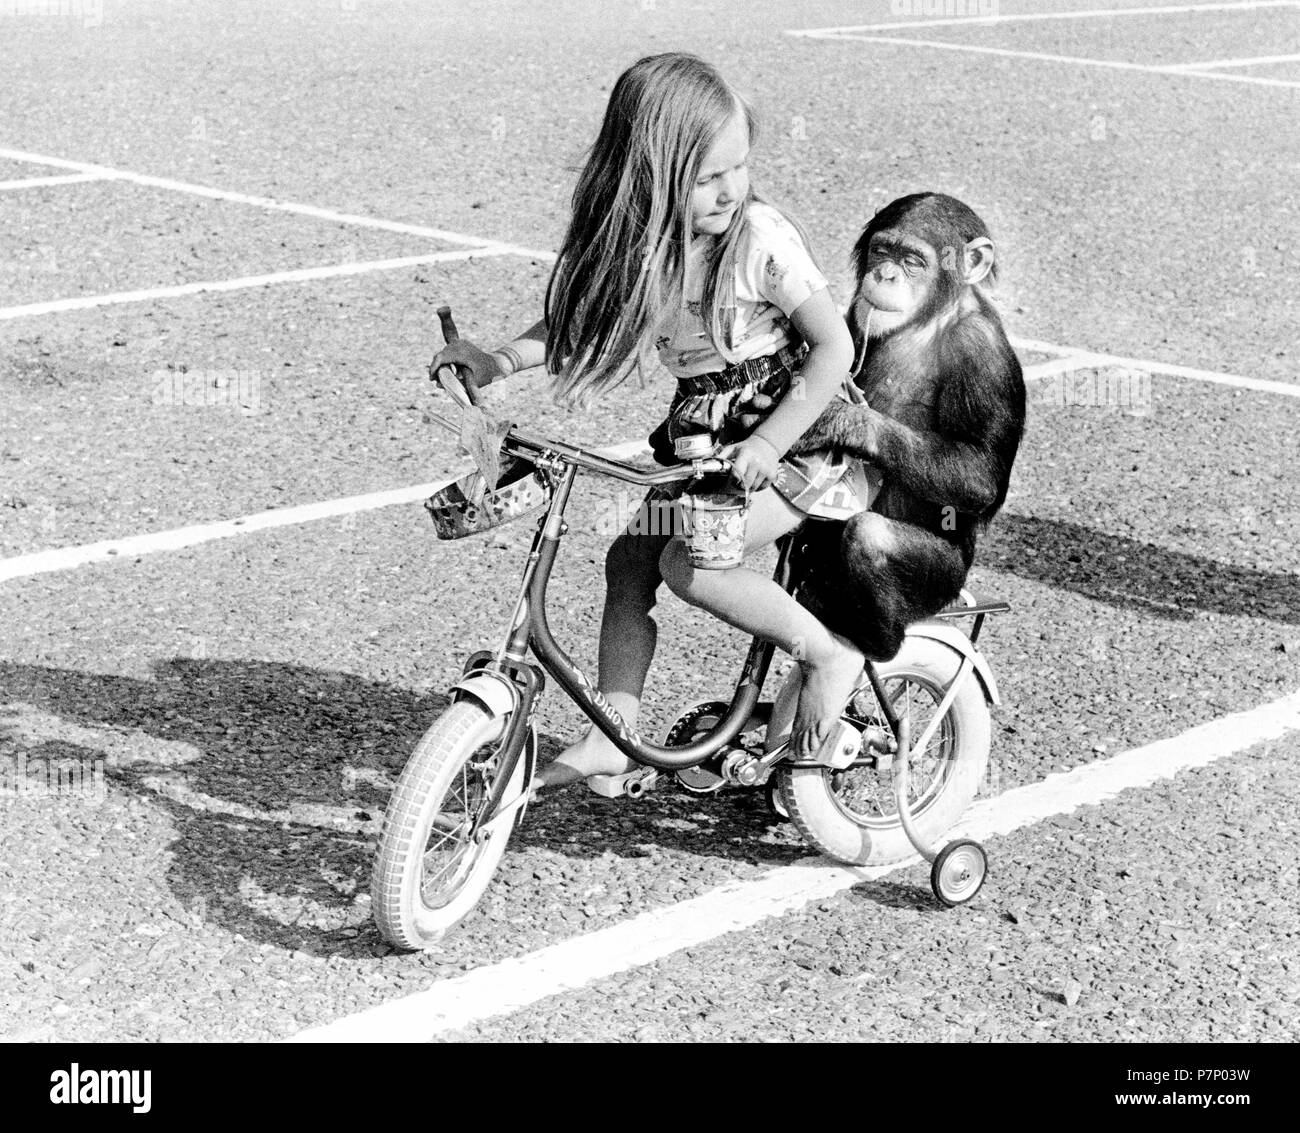 Chimpanzee and girl riding a bicycle, England, Great Britain Stock Photo